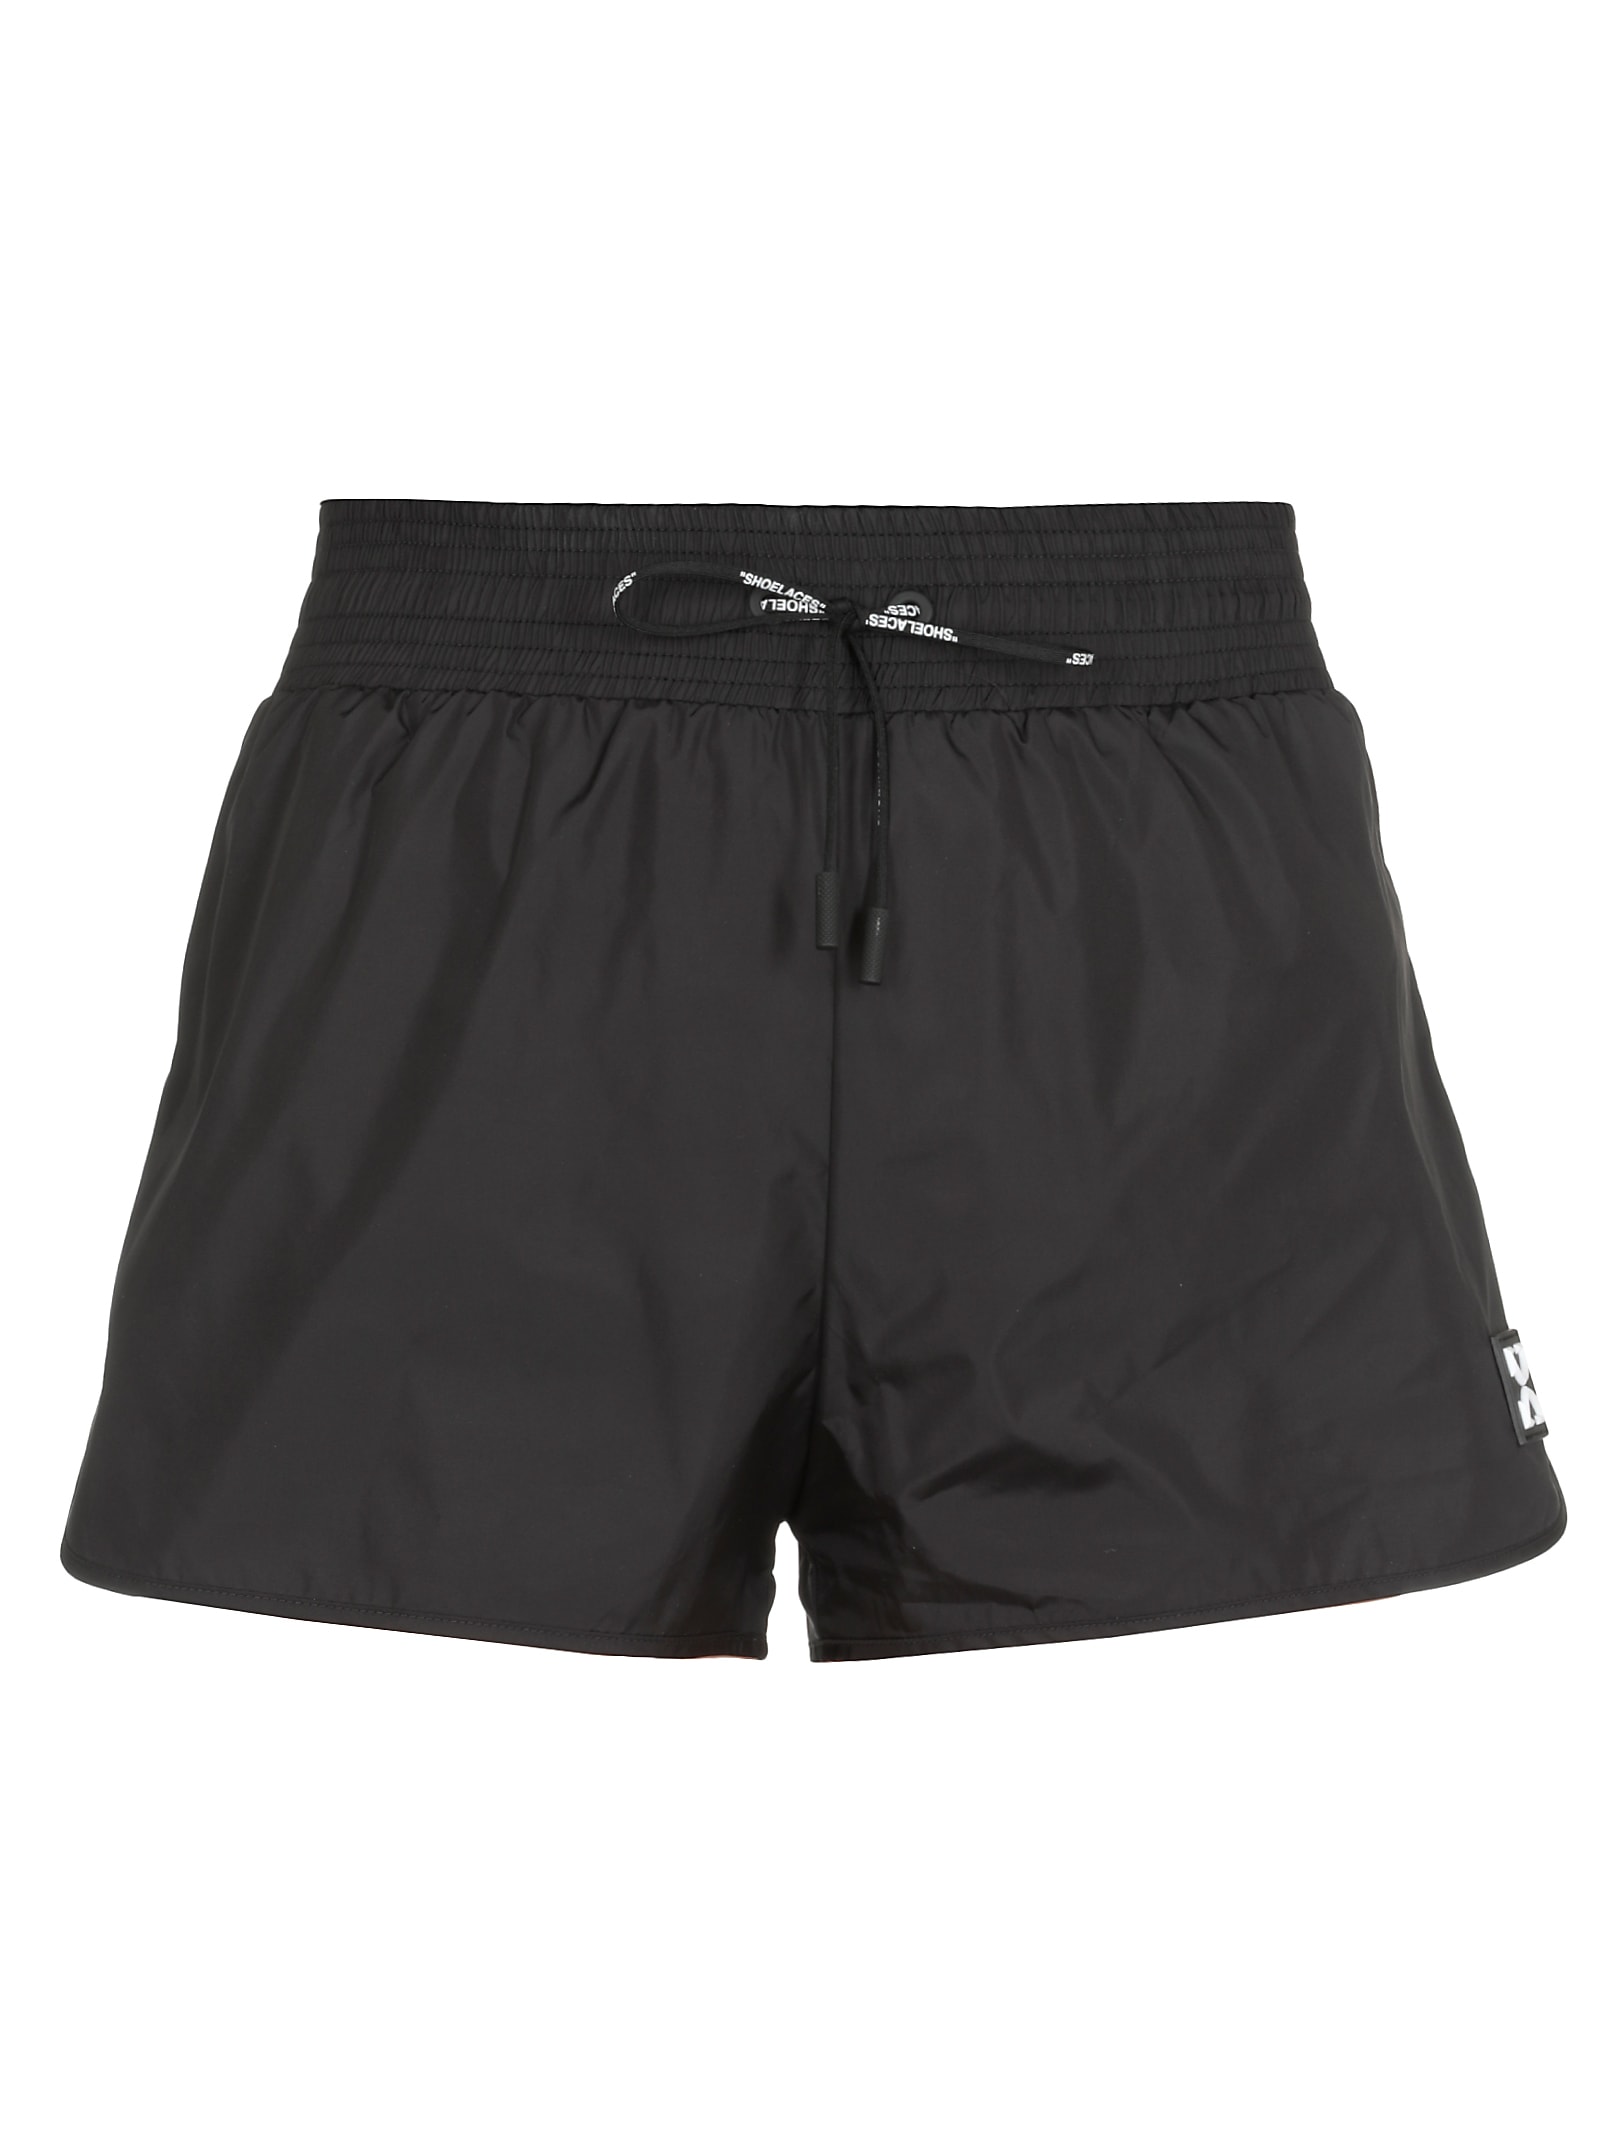 OFF-WHITE ACTIVE SHORTS,OWCB020R20A39068 ACTIVE 1000